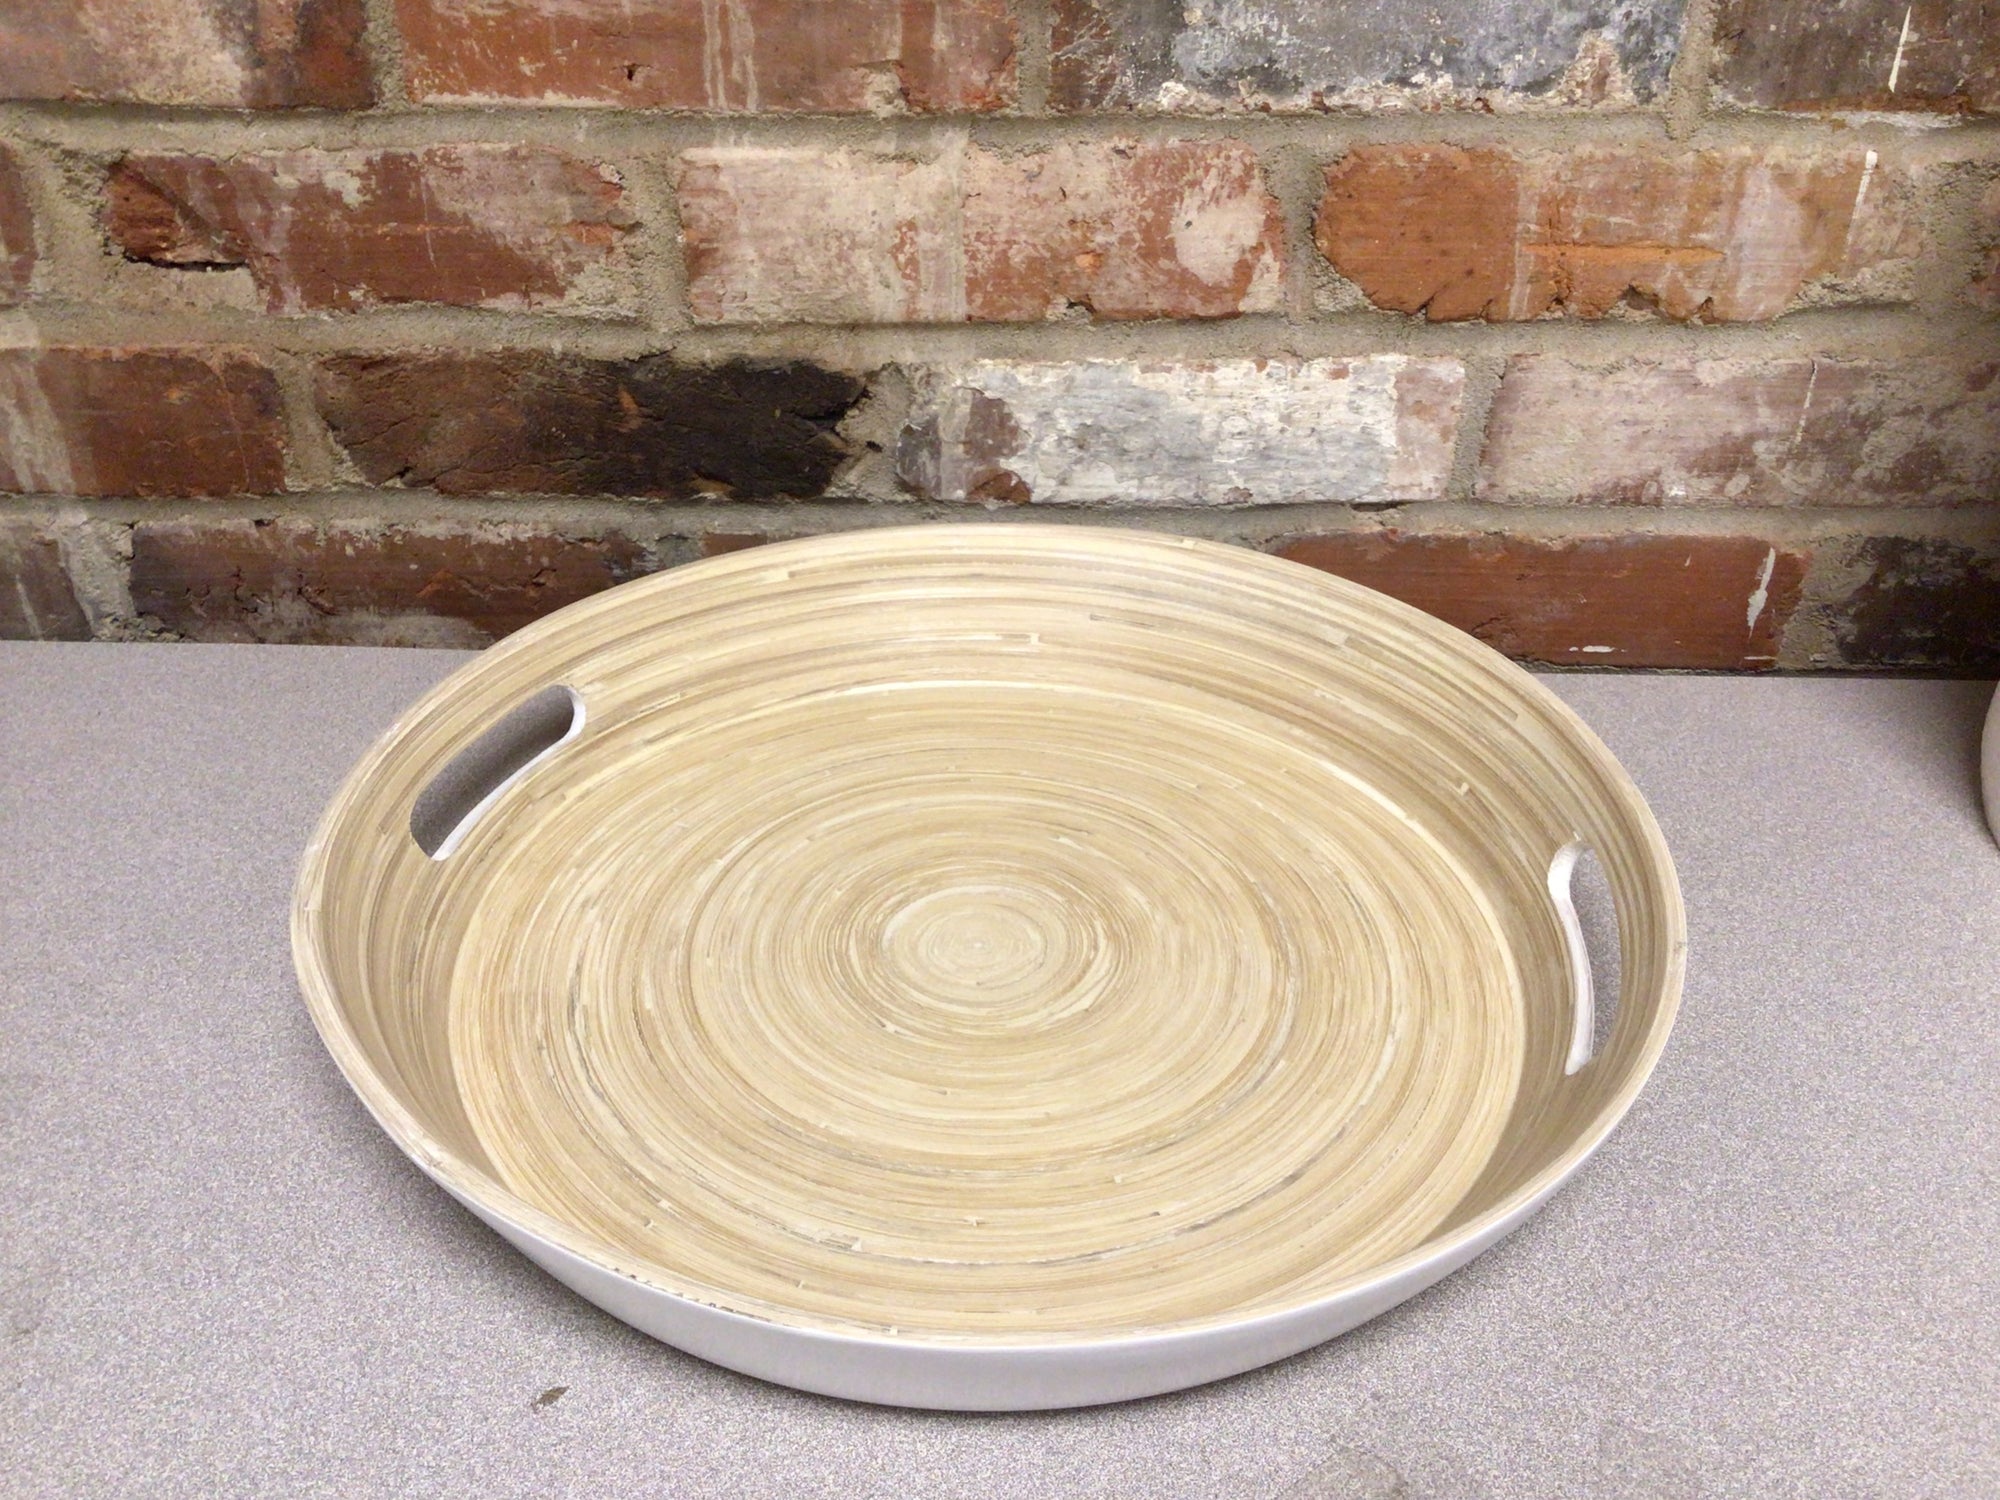 Bamboo Round Serving Tray